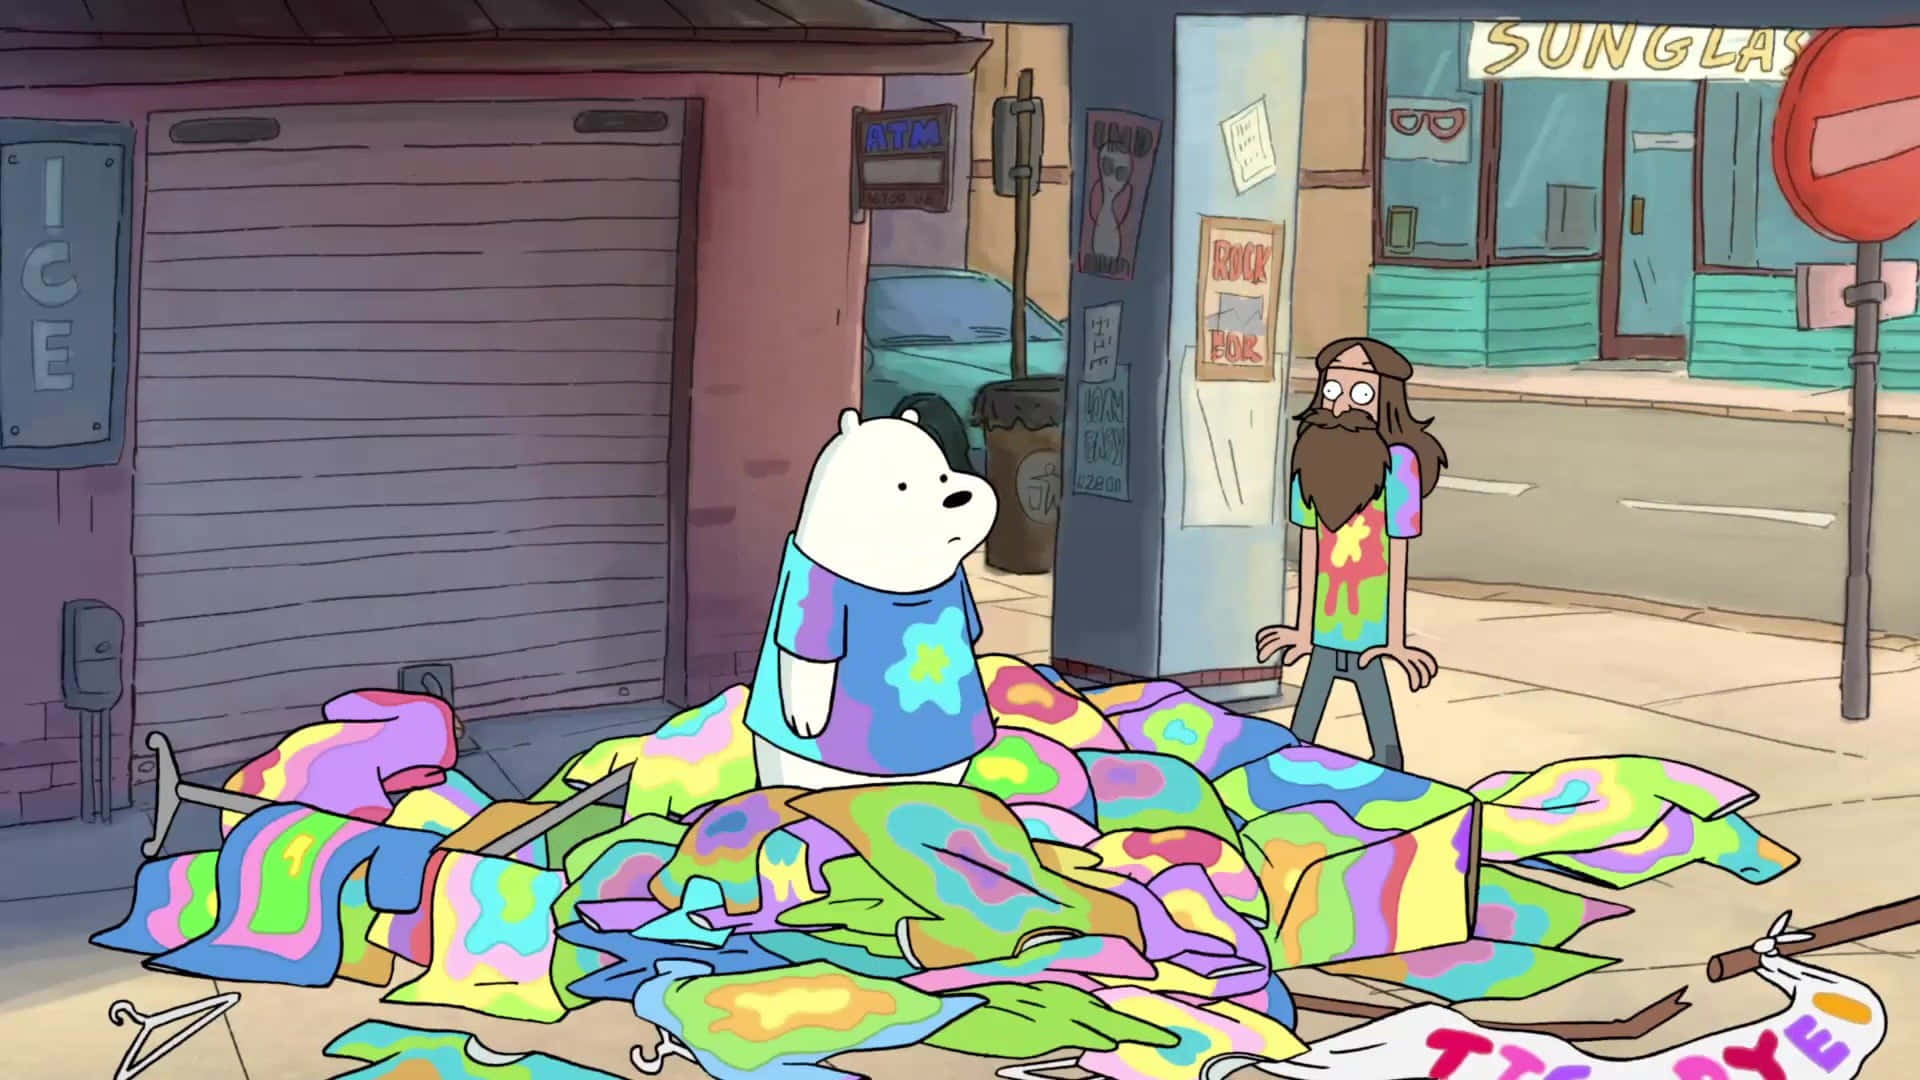 Fun times with the We Bare Bears.